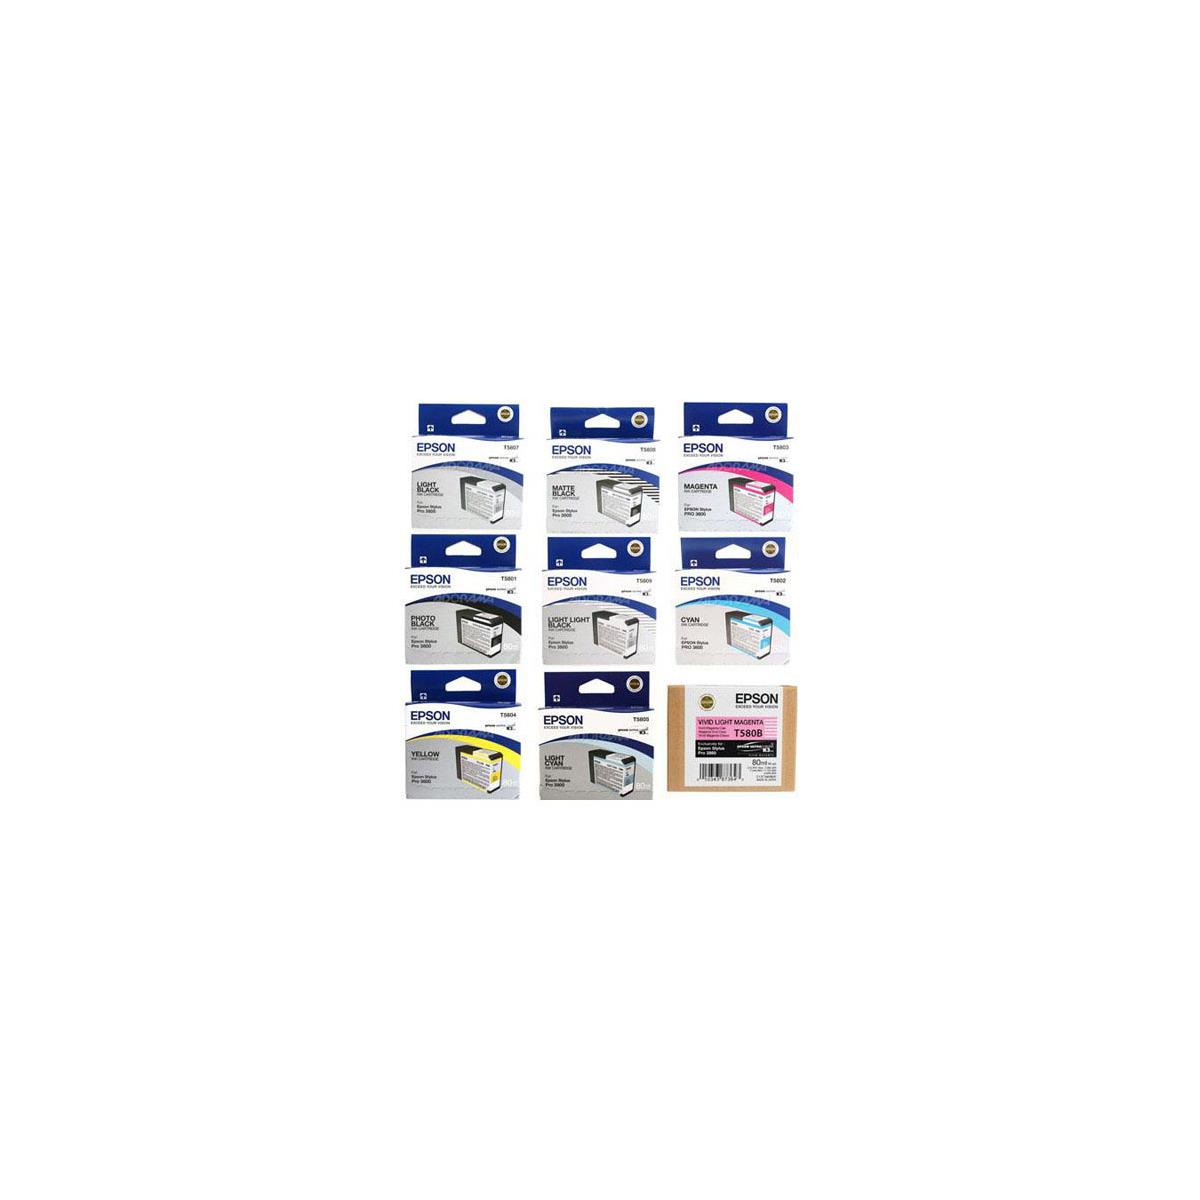 Image of Epson Complete Ink Cartridge Set for Epson 3880